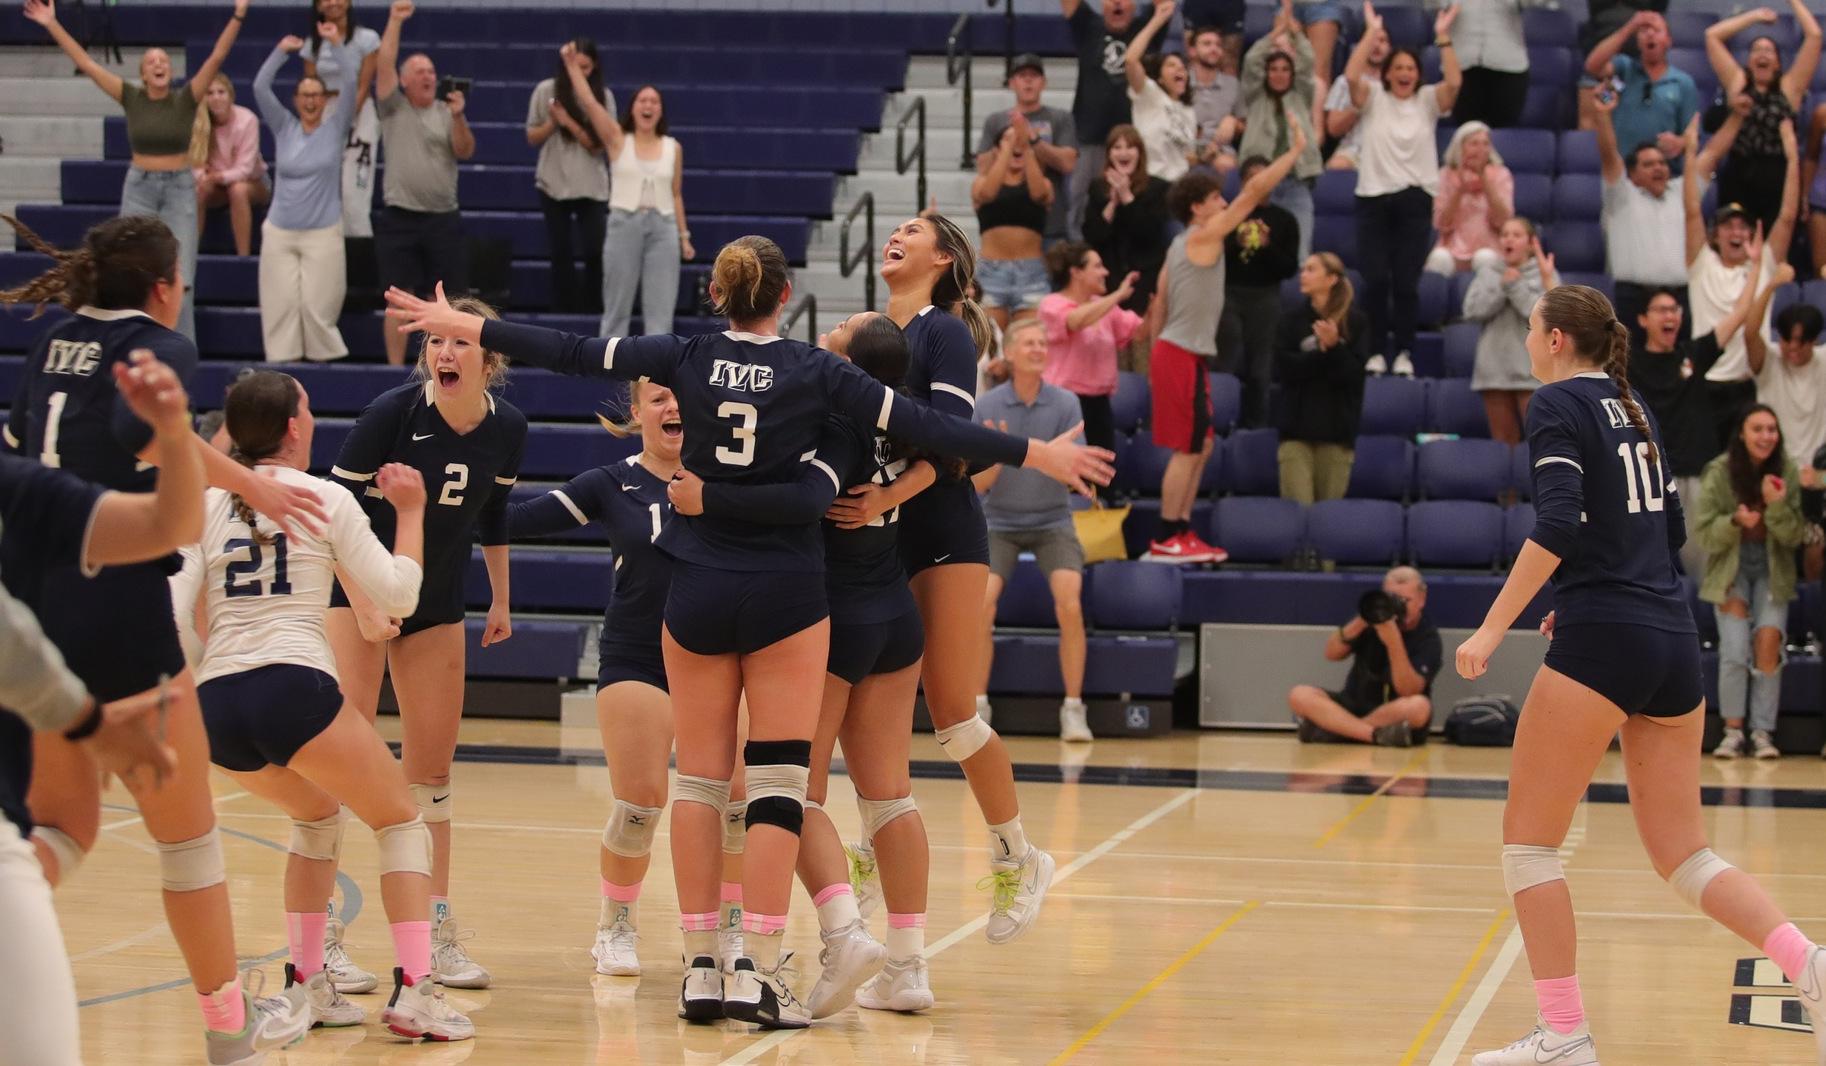 Women's volleyball team storms back, takes down OCC in five